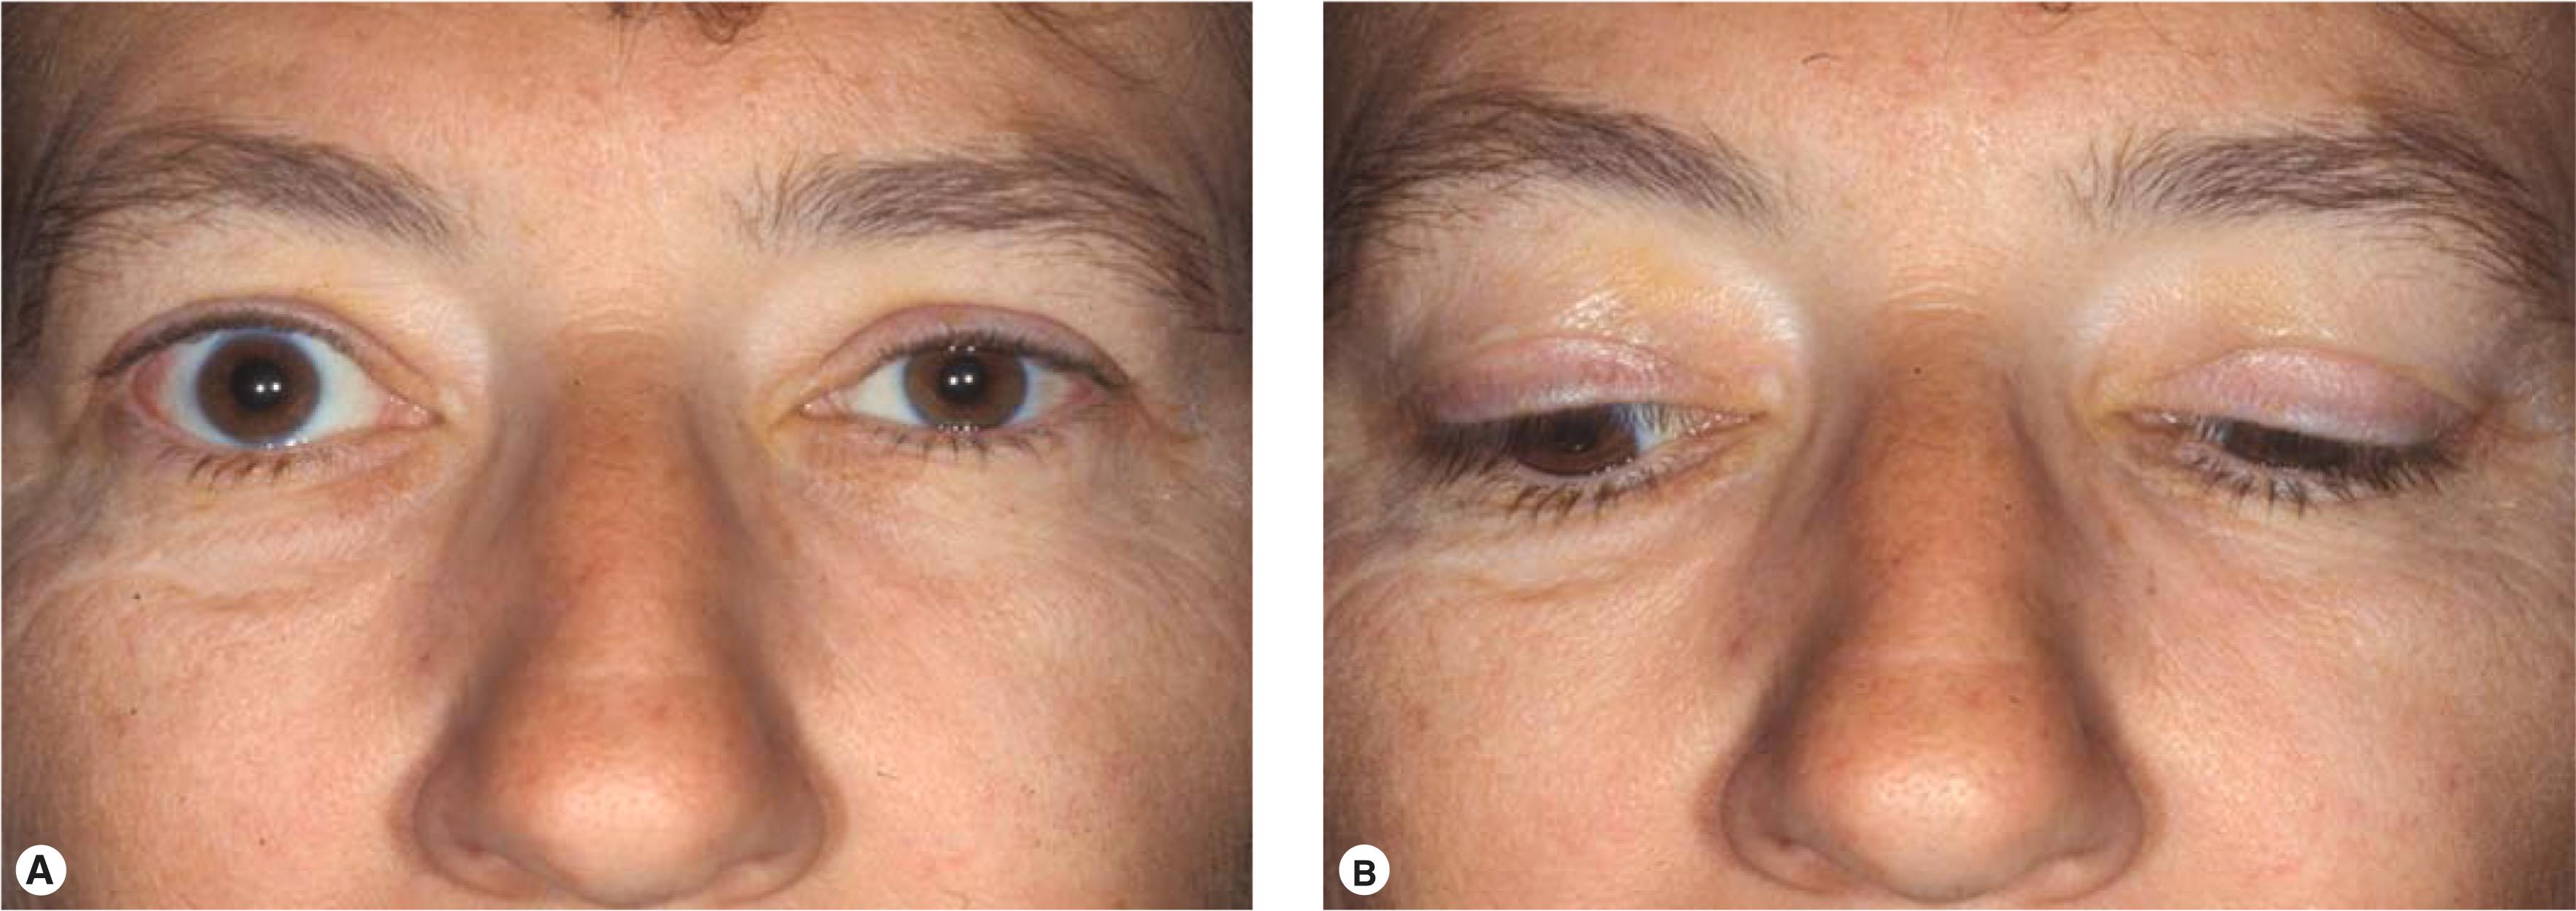 Figure 14.8, Periocular changes associated with thyroid orbitopathy. ( A ) Right upper lid retraction and temporal flare of the lateral upper eyelid, suggesting thyroid orbitopathy. ( B ) Lid lag on downgaze in the same patient.